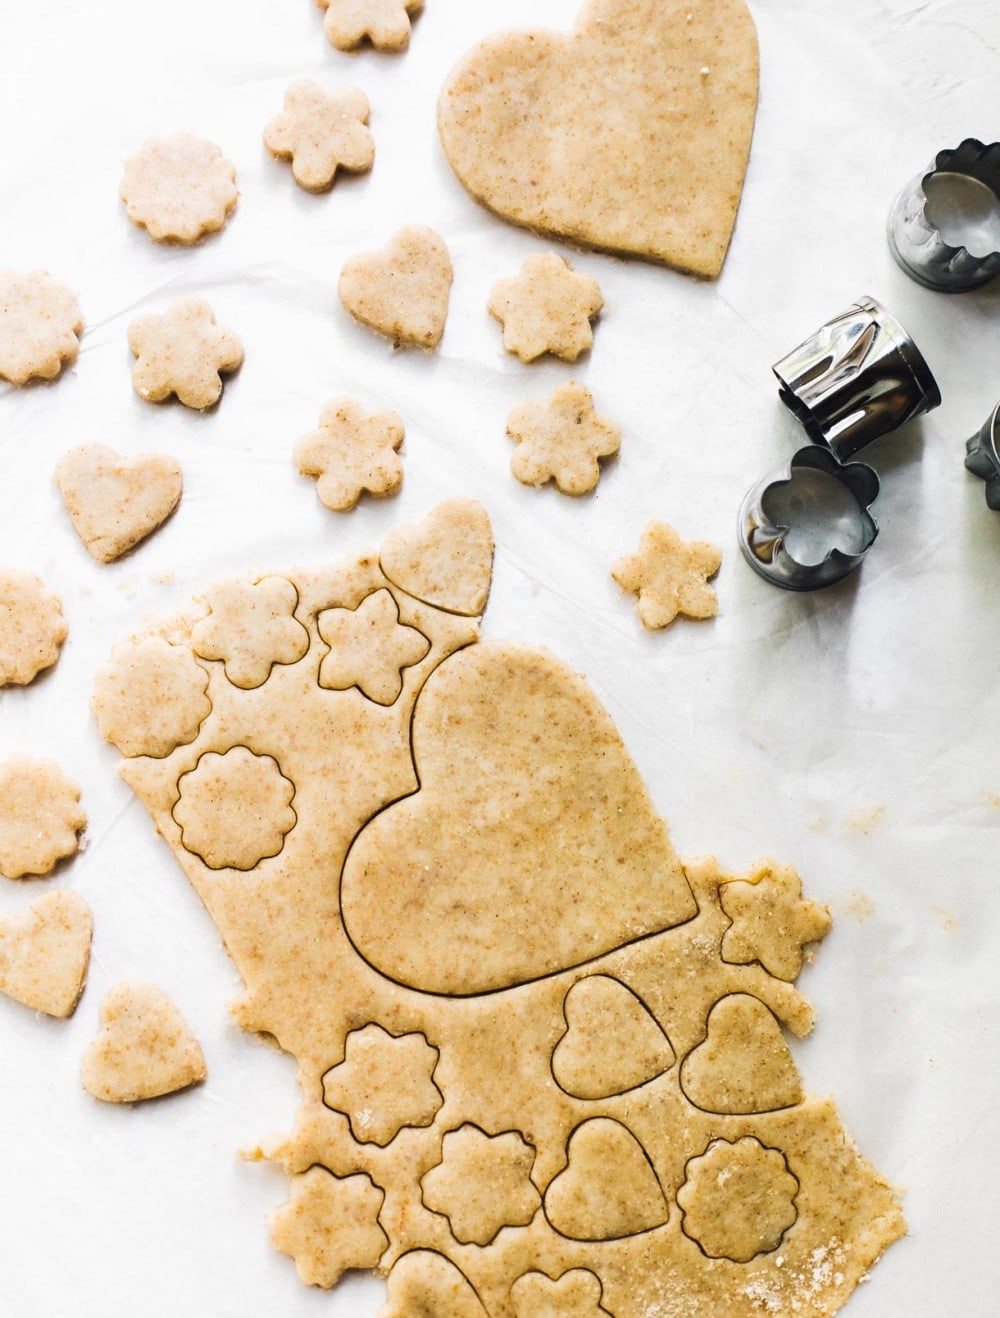 cutting out hearts out of pie crust dough with mini cookie cutters